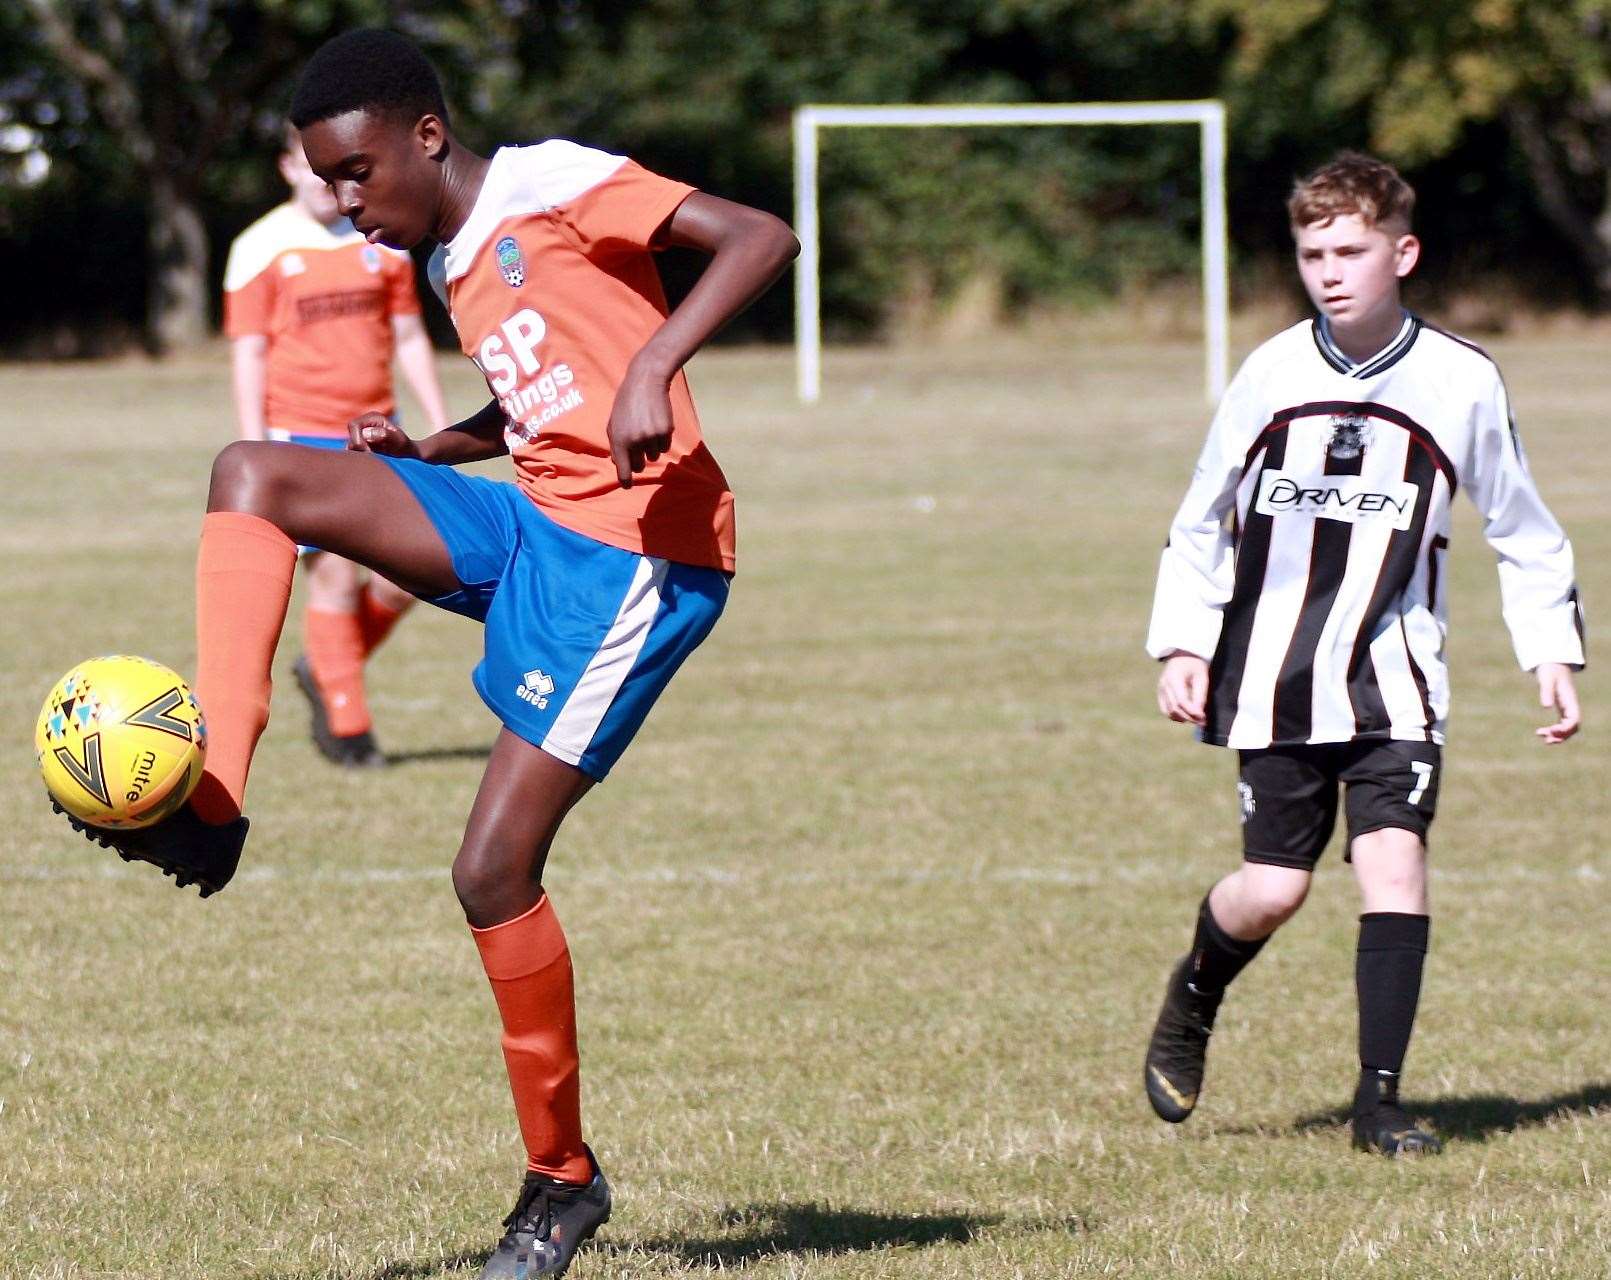 Cuxton 91 in possession against Milton & Fulston in Under-15 Division 1 Picture: Phil Lee